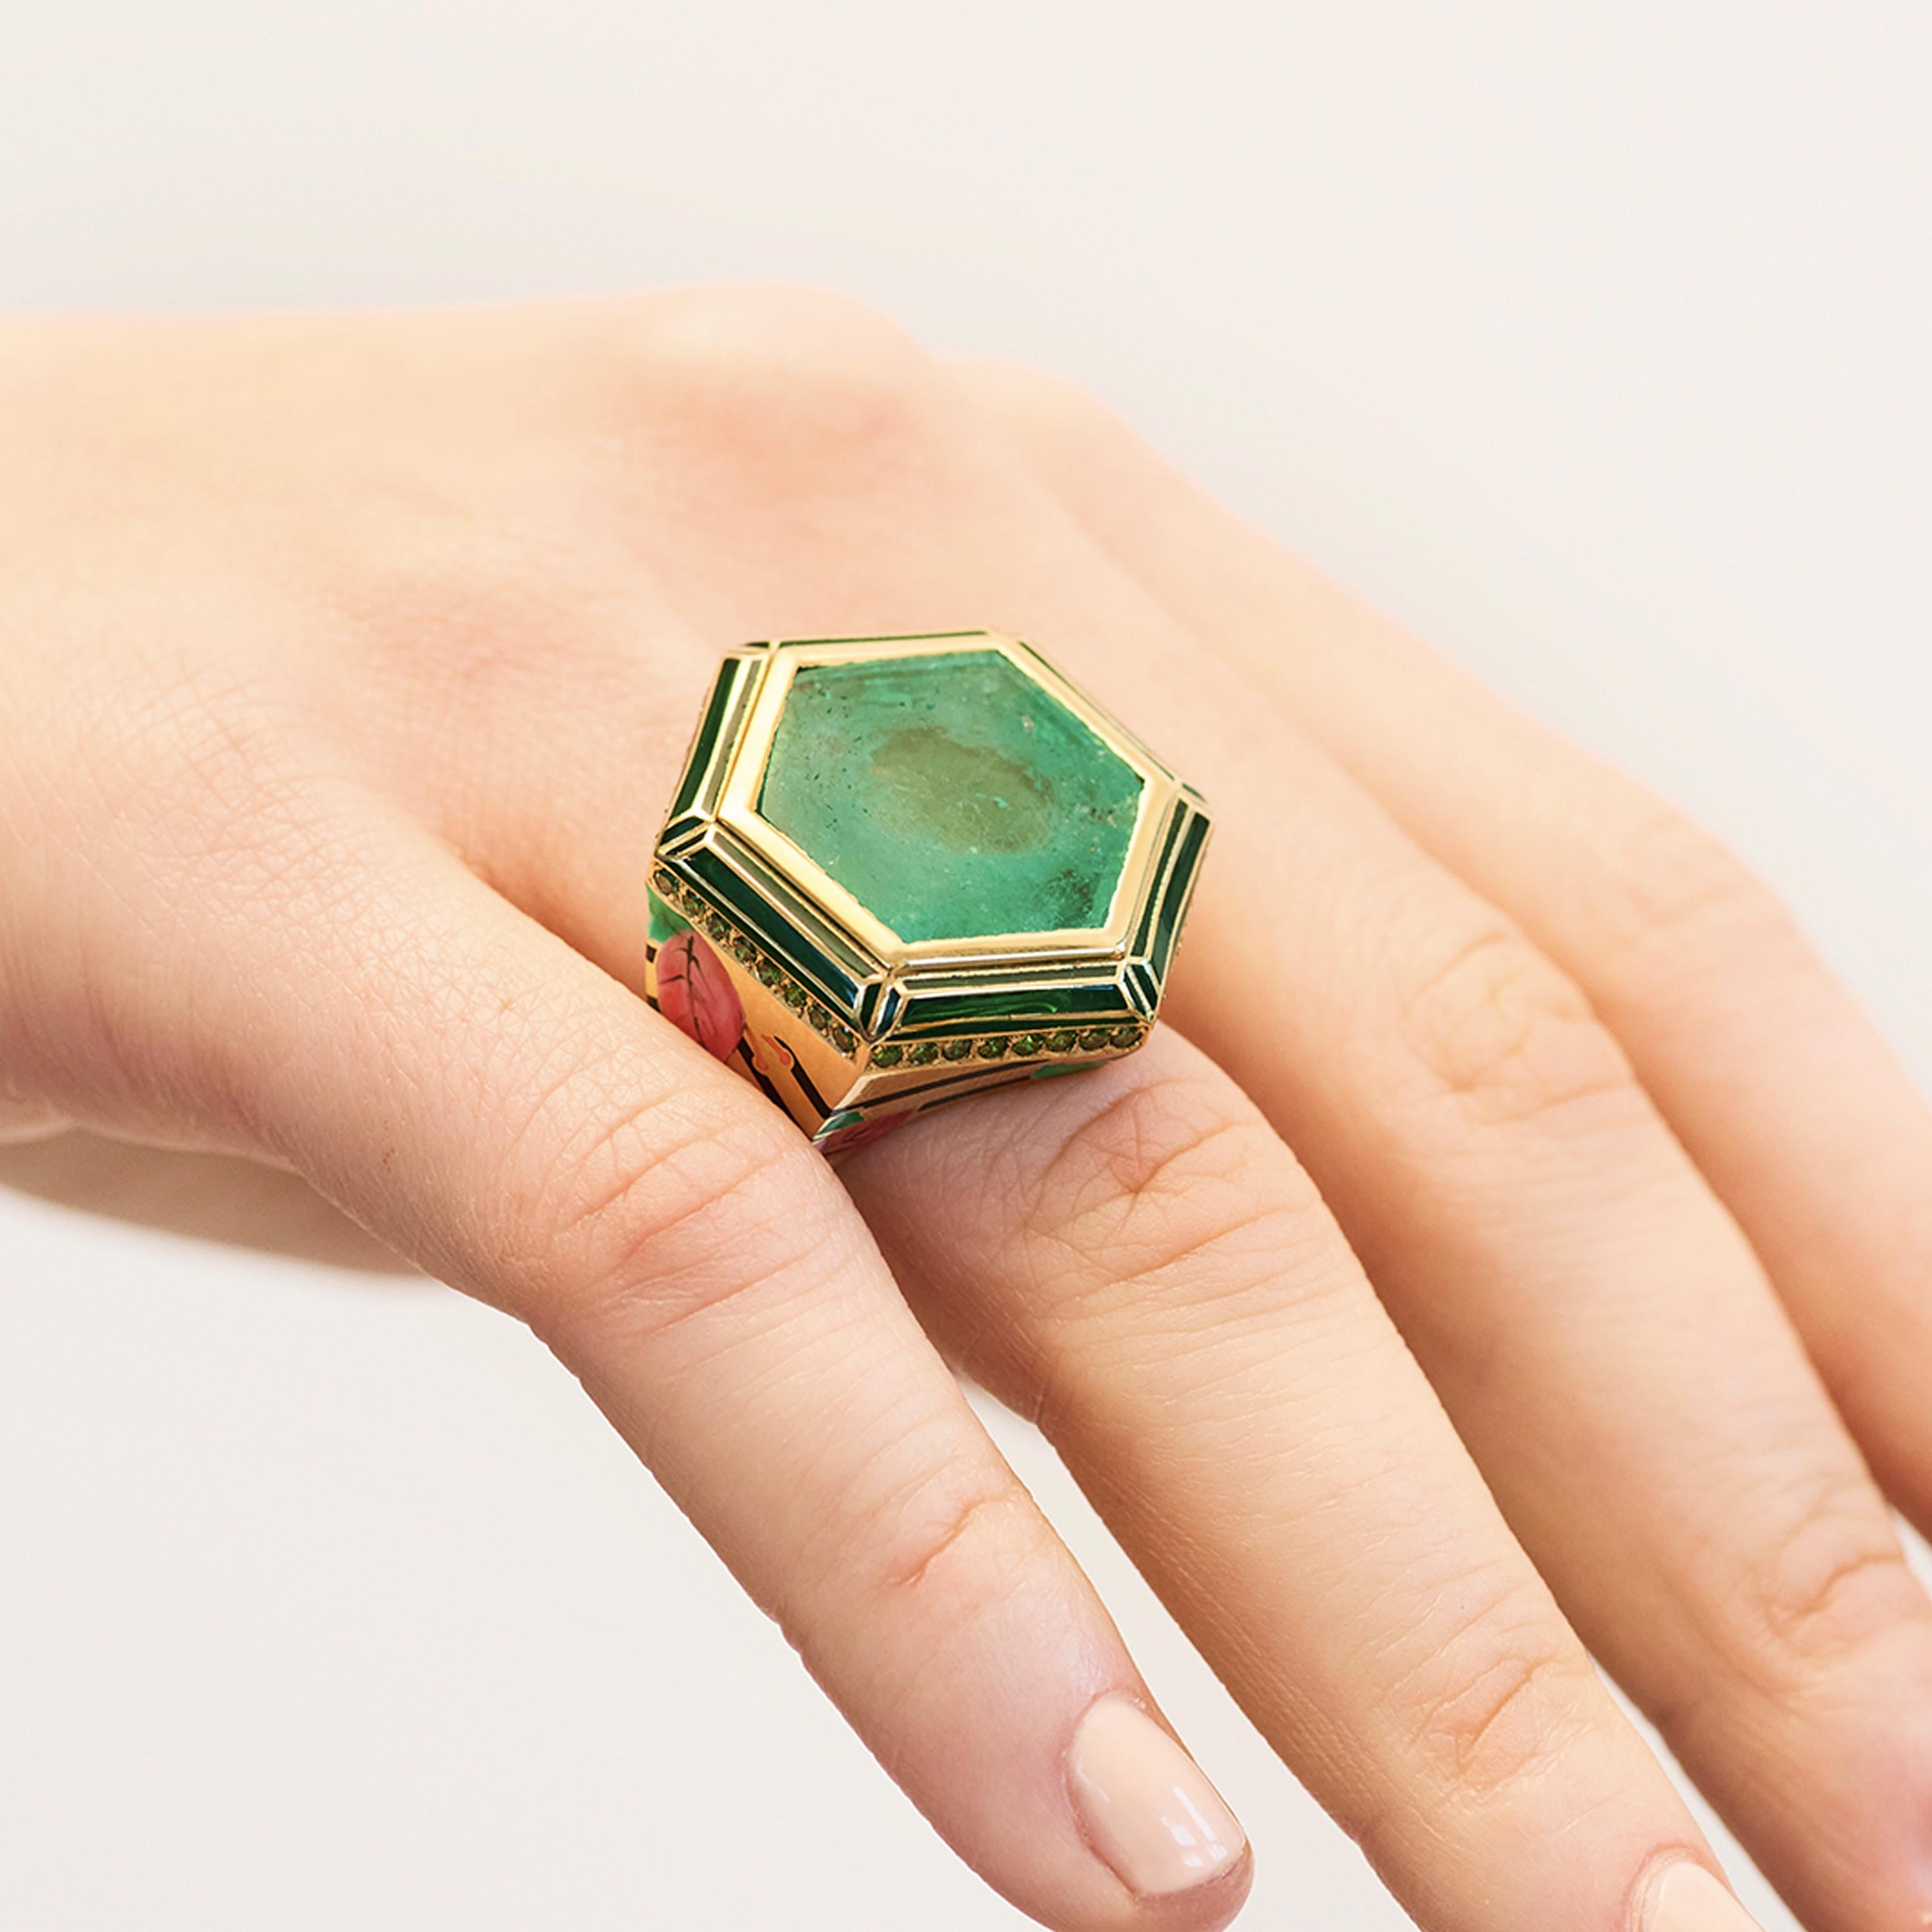 British designer Alice Cicolini's Jaipur Bouganvillea Muzo Emerald Ring is a stunning cocktail ring crafted from from 18k yellow gold. The ring is hand painted in London with lacquer enamel, and is set with a Muzo trapiche emerald (13.26ct) and